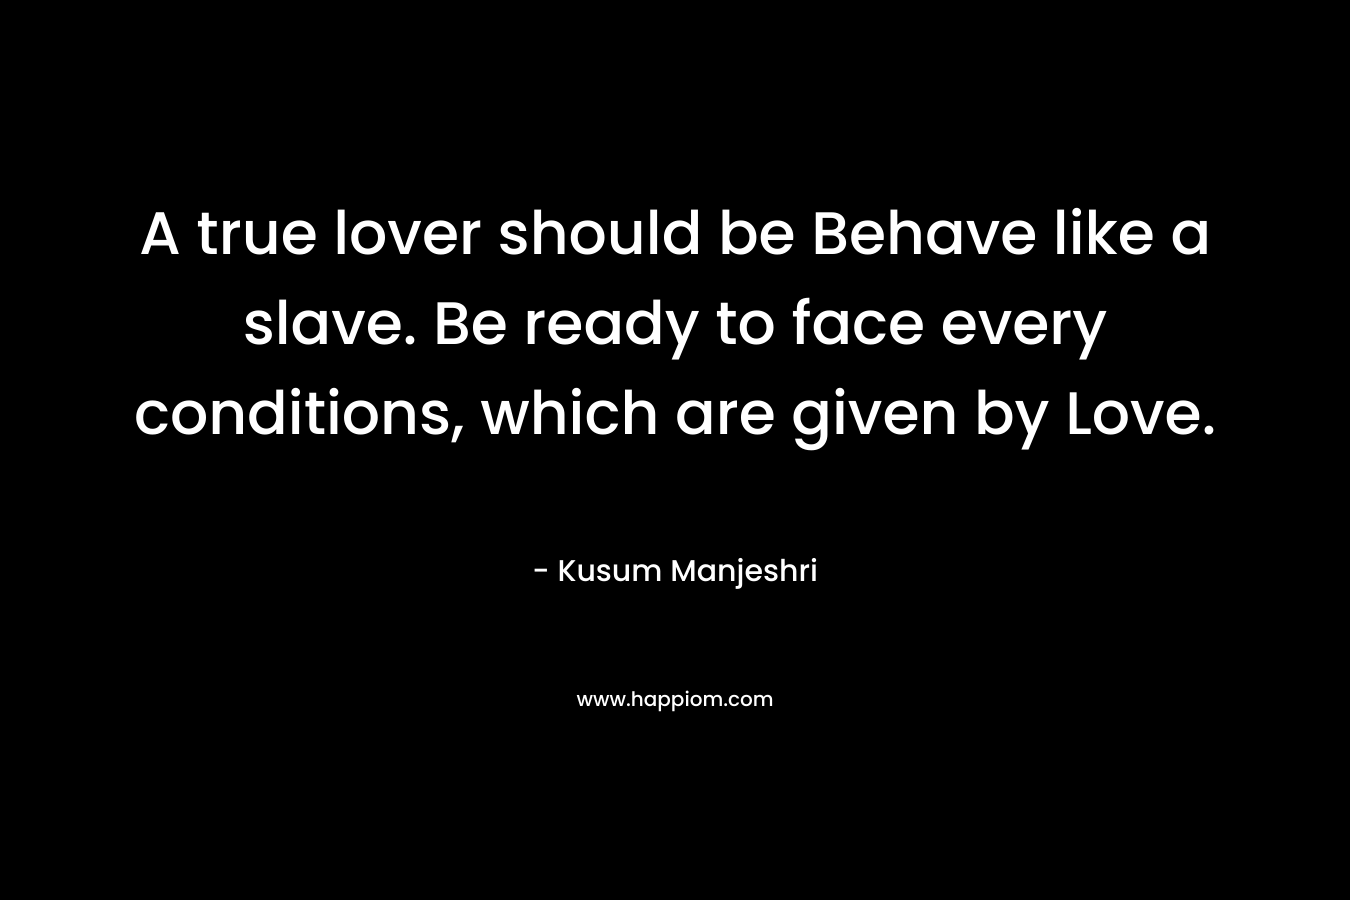 A true lover should be Behave like a slave. Be ready to face every conditions, which are given by Love. – Kusum Manjeshri